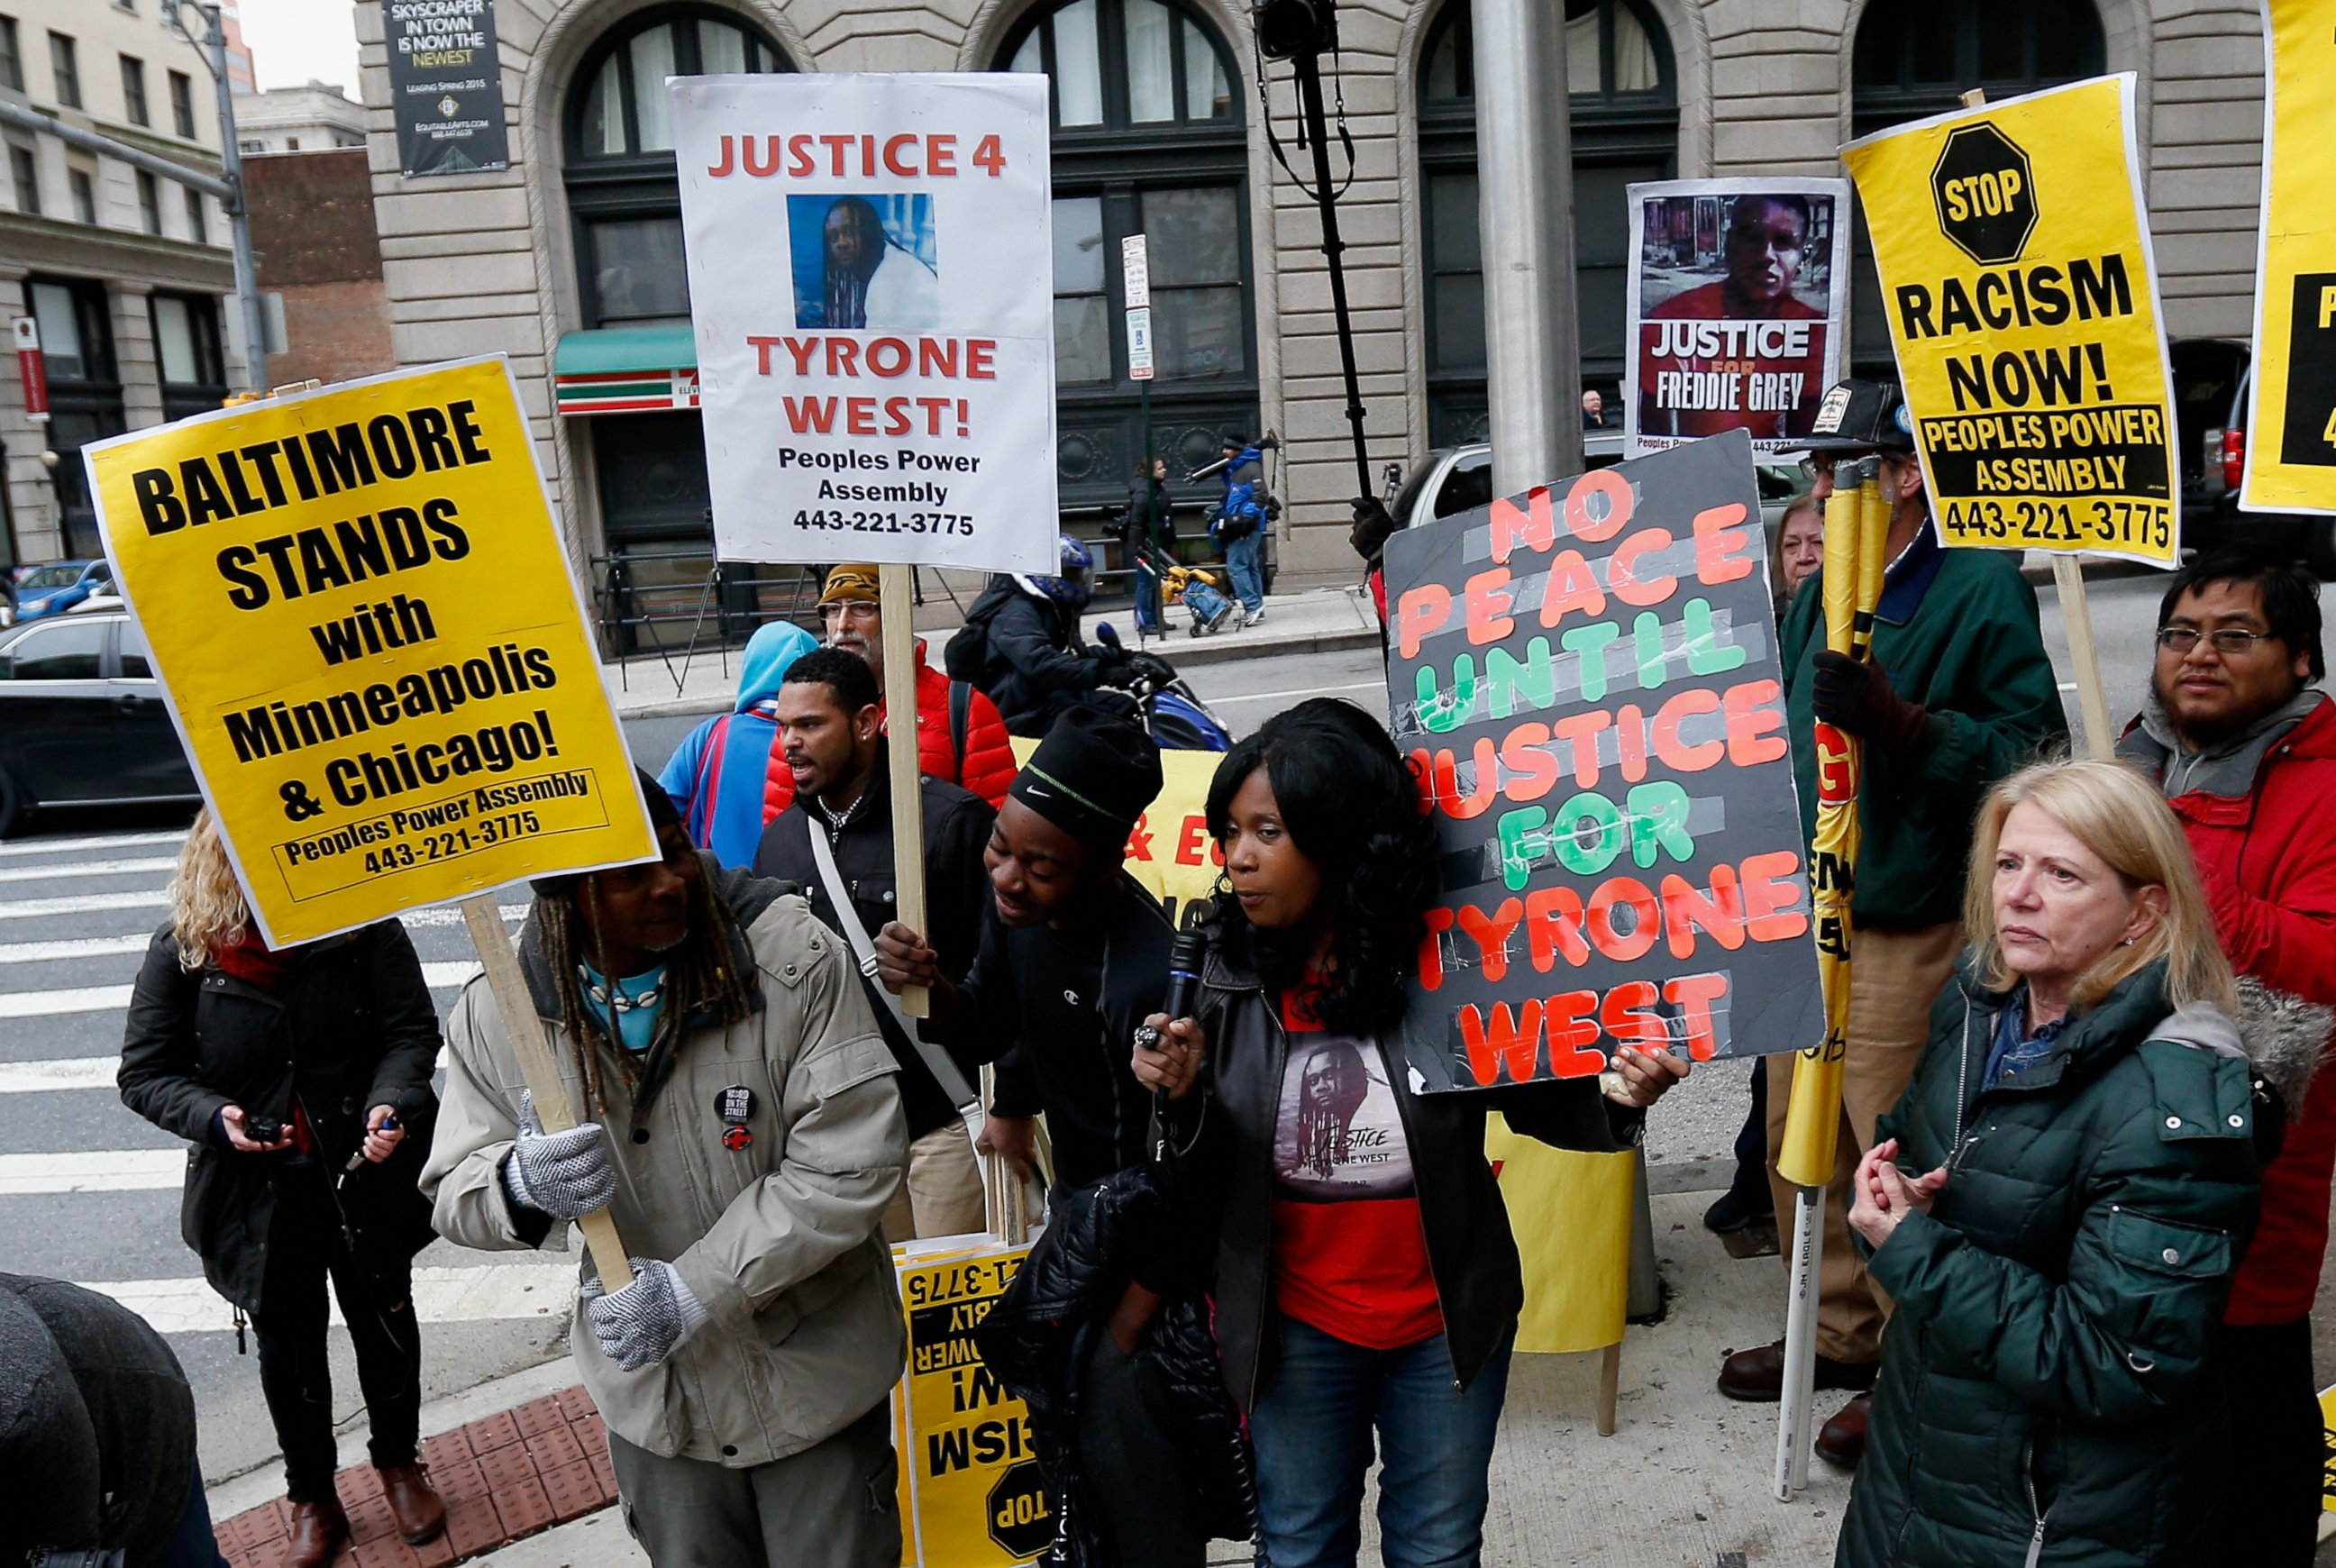 PHOTO:Protestors hold up signs in front of the courthouse where jury selection began in the trial of William Porter, one of six Baltimore city police officers charged in connection to the death of Freddie Gray, Nov. 30, 2015, in Baltimore. 